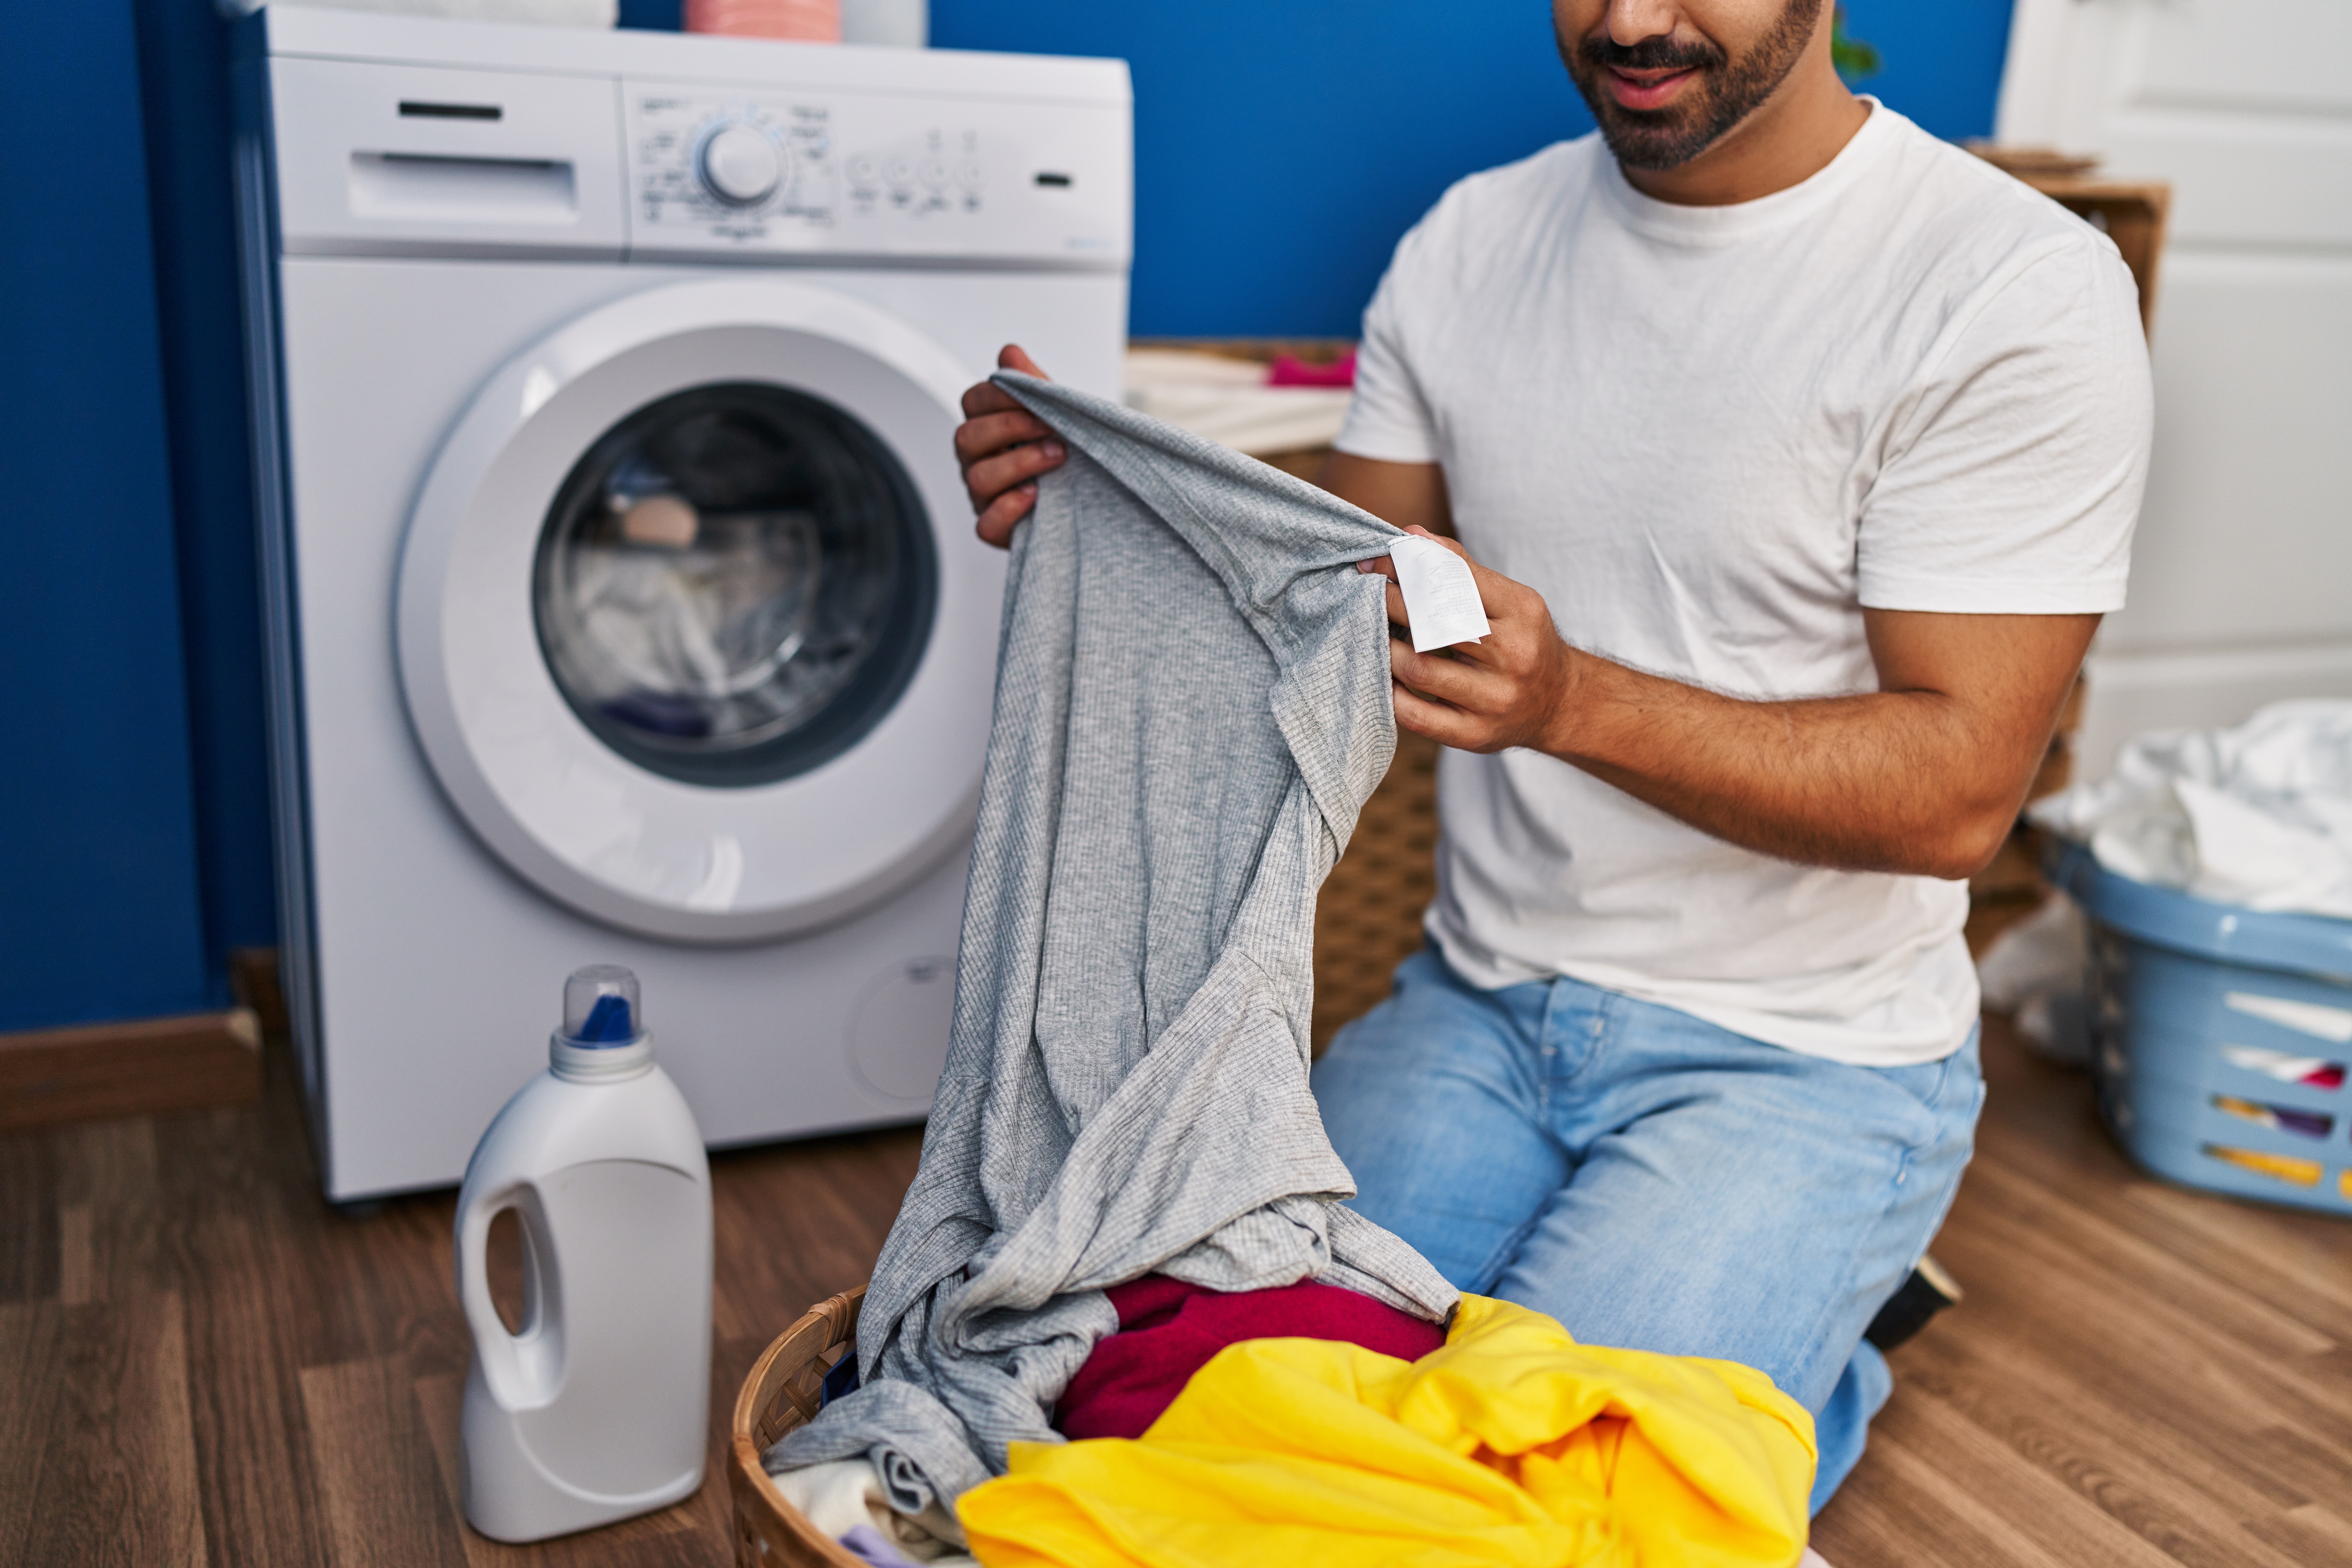 Man kneeling on the ground in front of a washing machine next to a pile of clothes